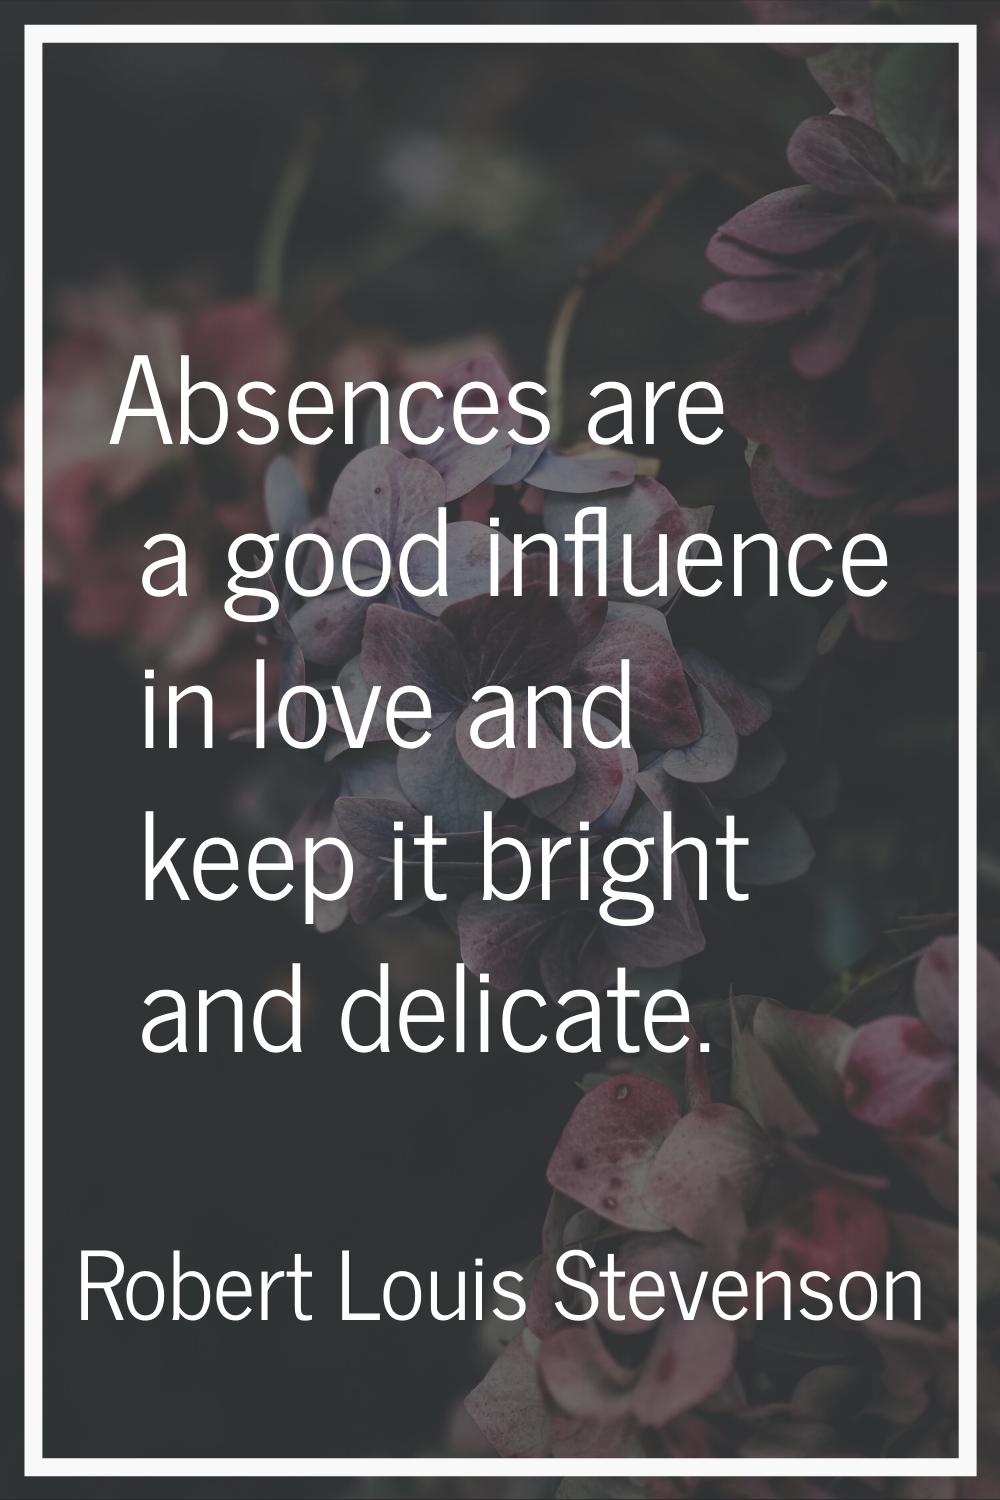 Absences are a good influence in love and keep it bright and delicate.